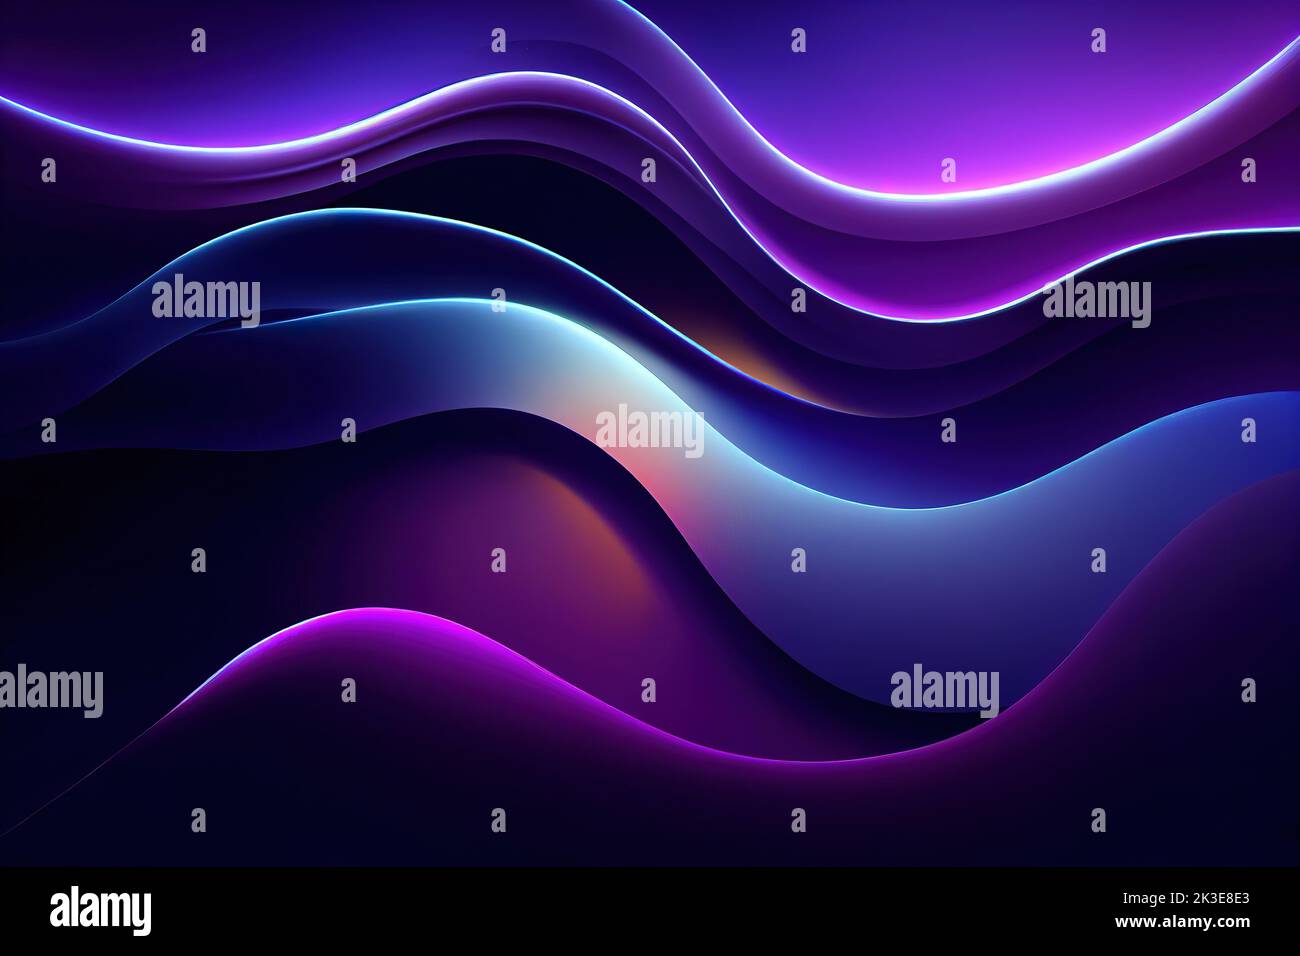 Colorful abstract background with lilac blue neon light waves pattern. 3D style illustration. Stock Photo